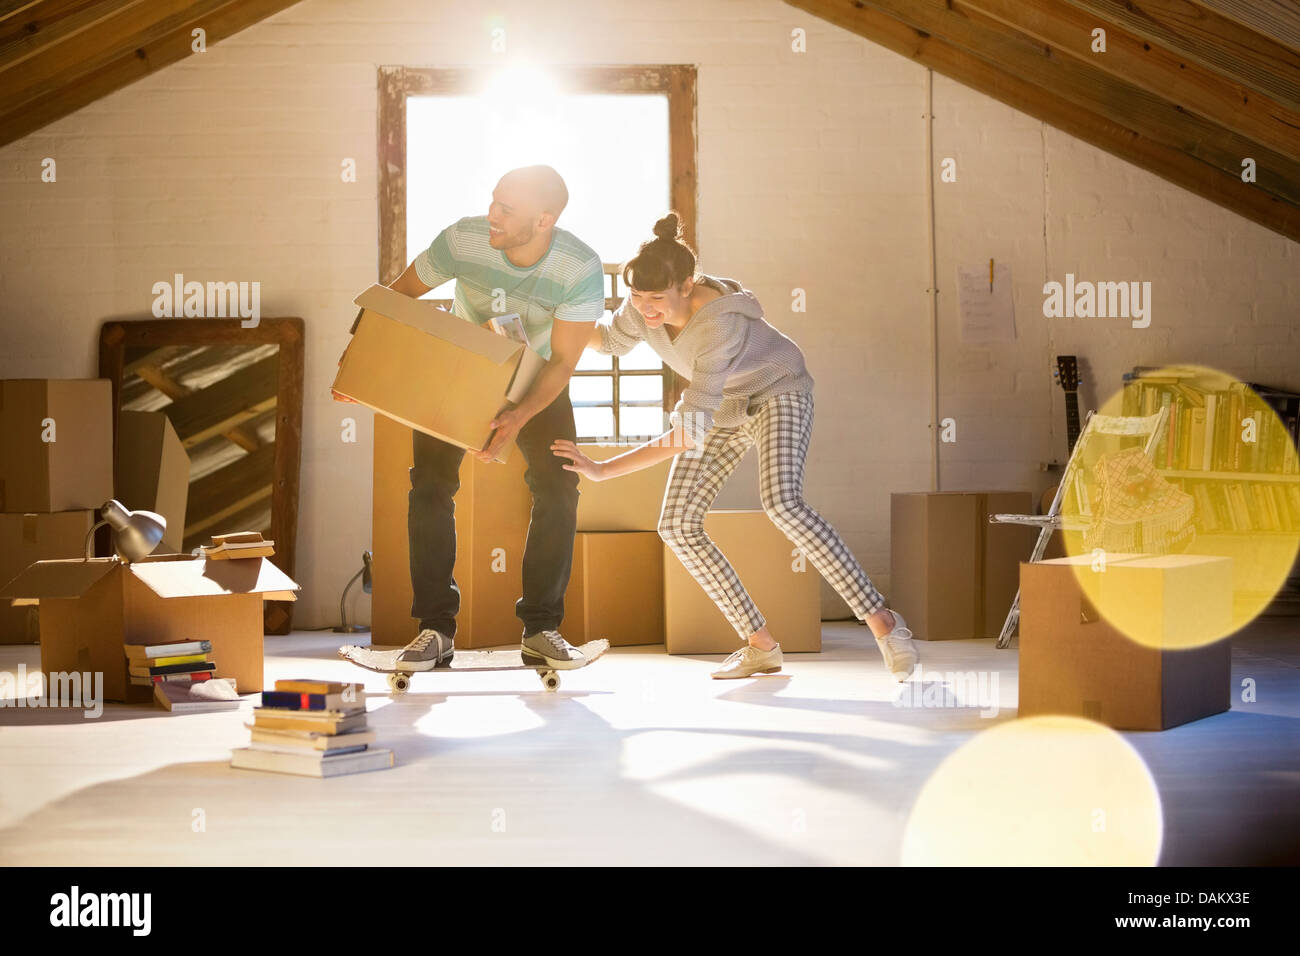 Couple unpacking boxes in attic Banque D'Images